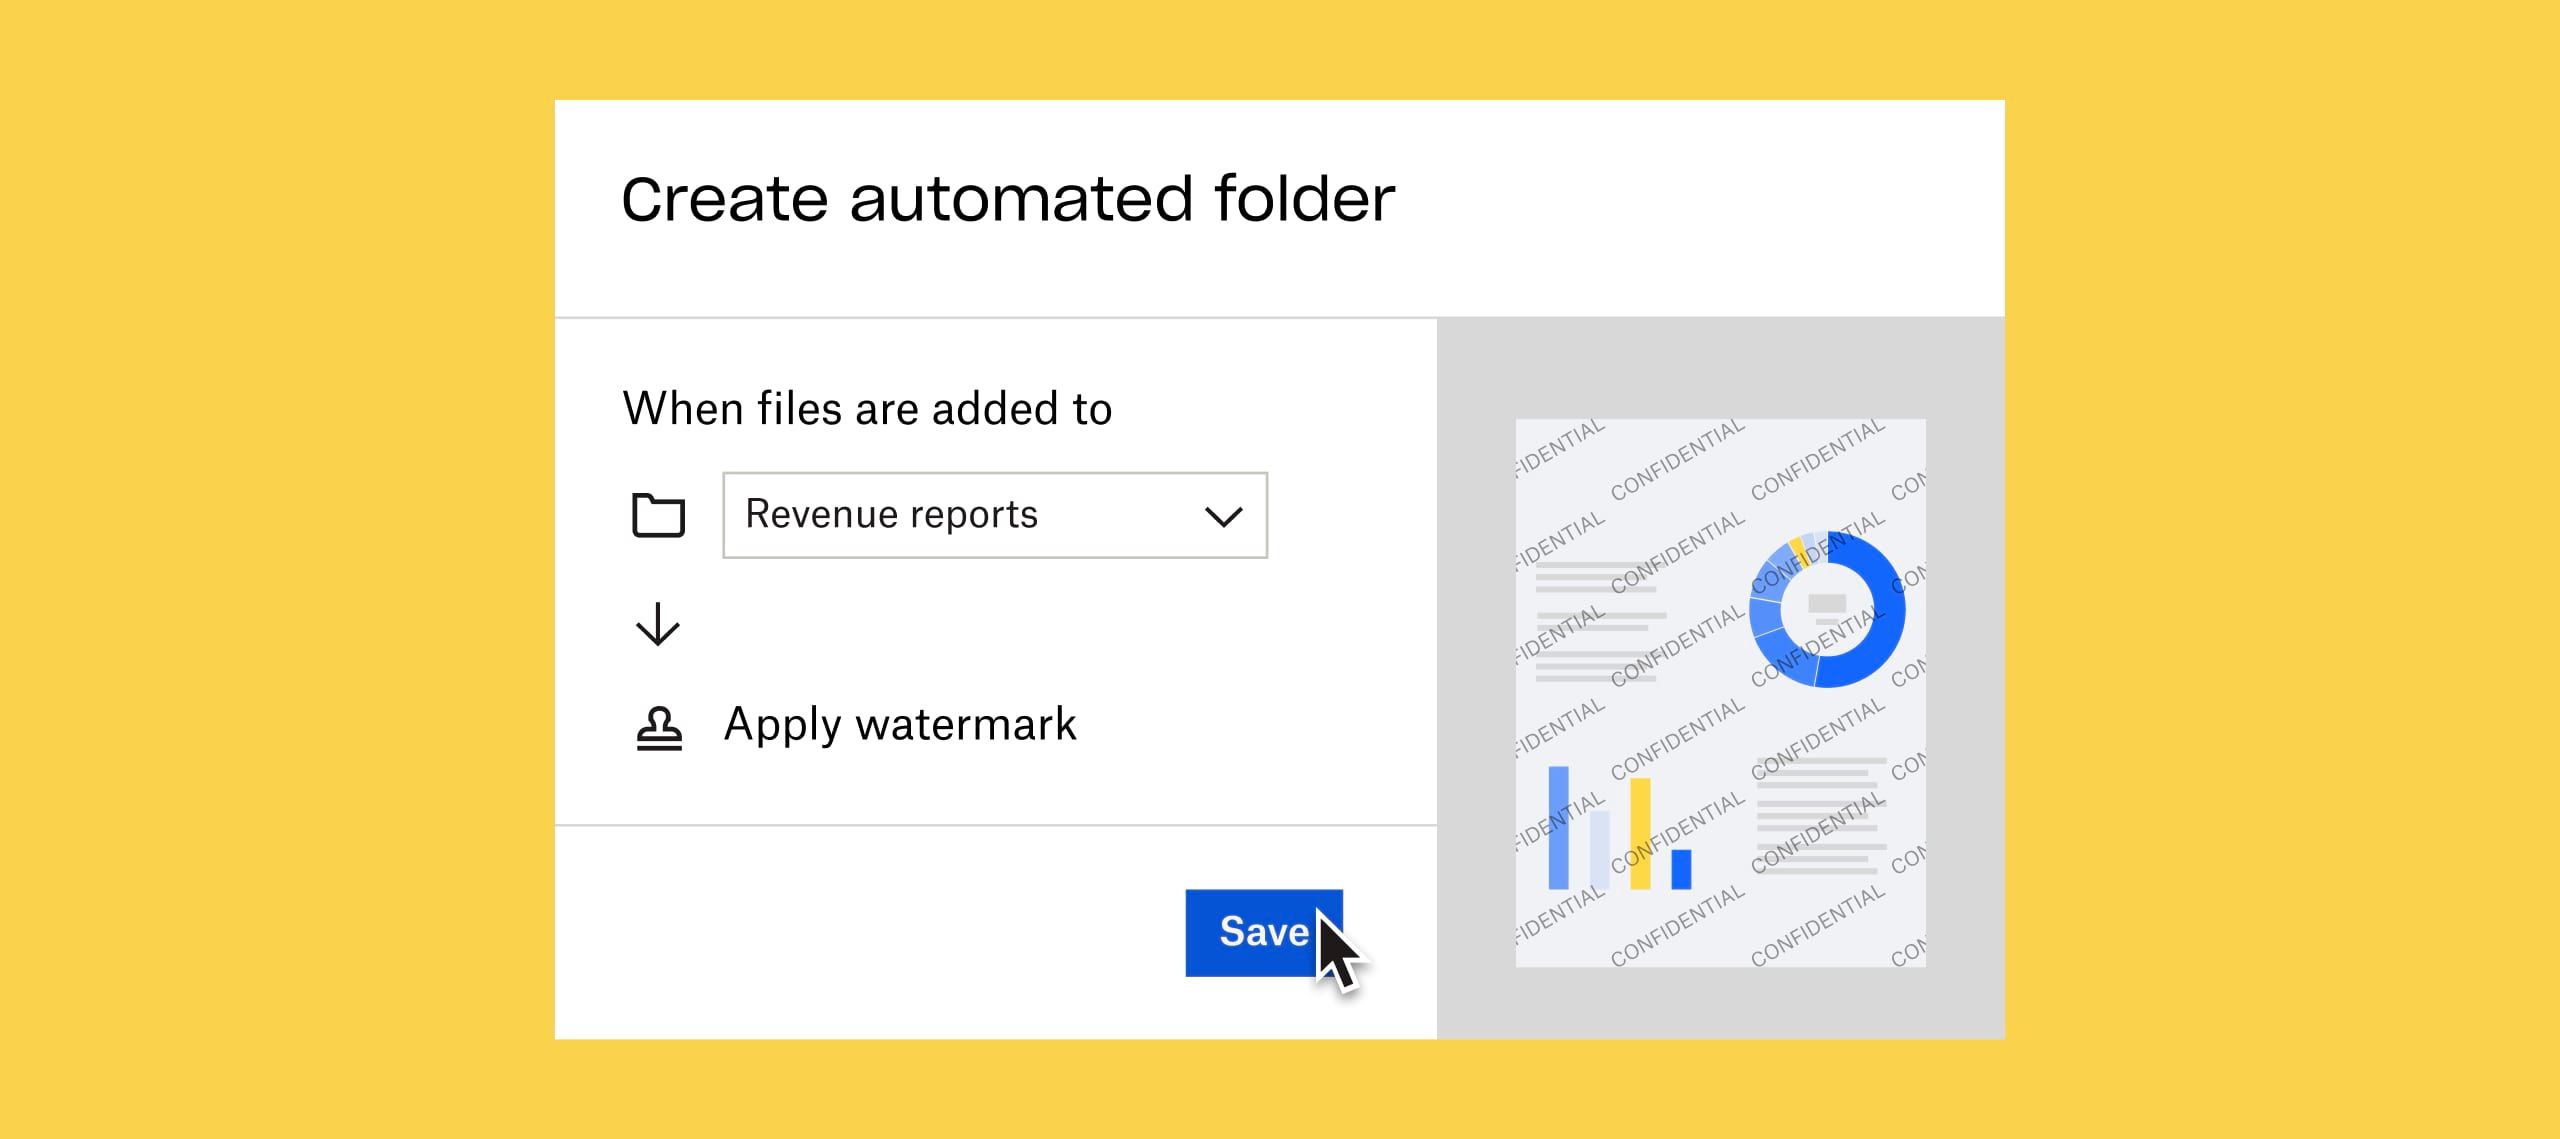 A user clicking a blue “save” button to automatically apply a watermark to any document added to the “revenue reports” folder